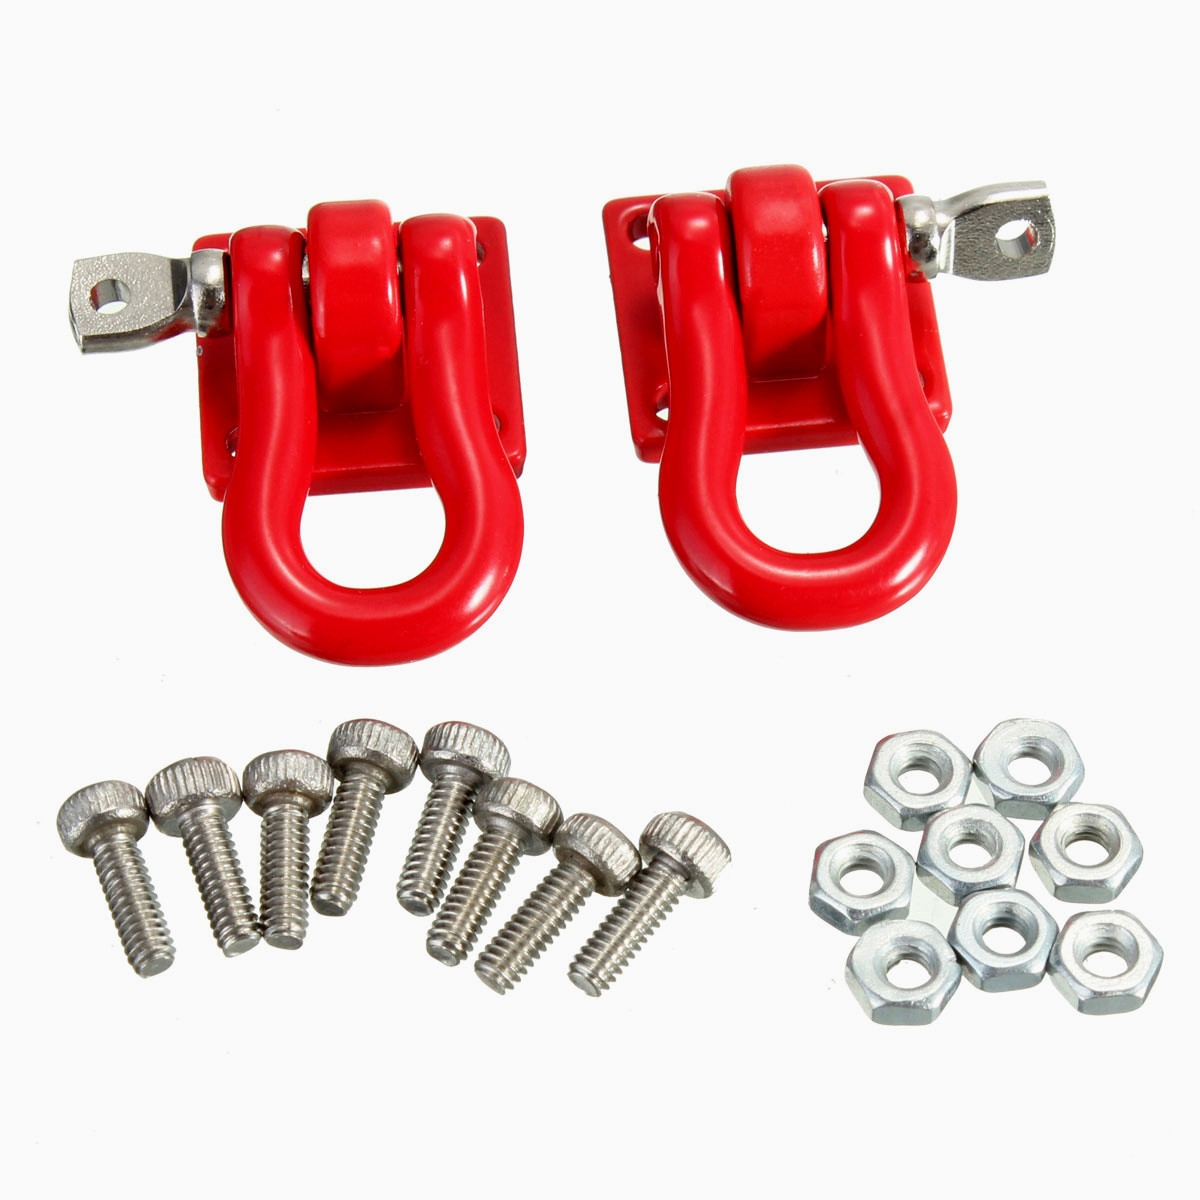 1 Pair Trailer Hook 1:10 Scale Accessory For RC Crawler SCX-10 Truck 